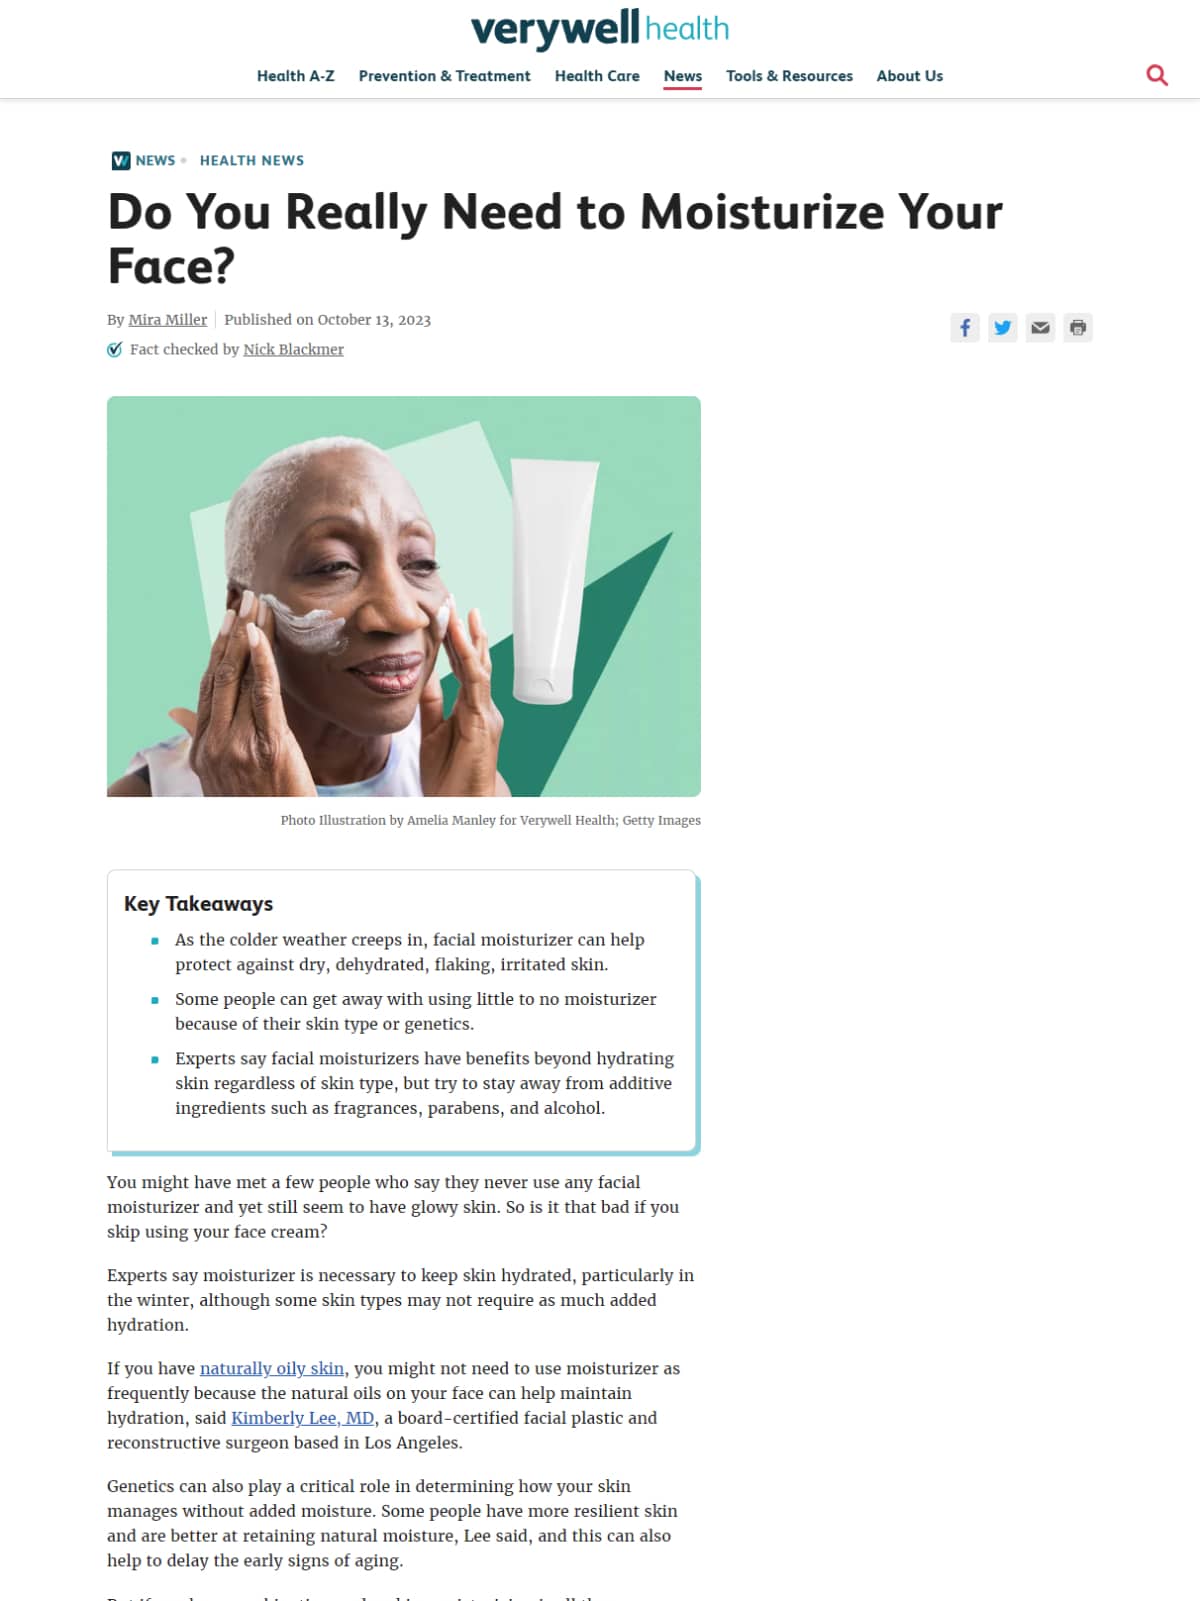 Do You Really Need to Moisturize Your Face